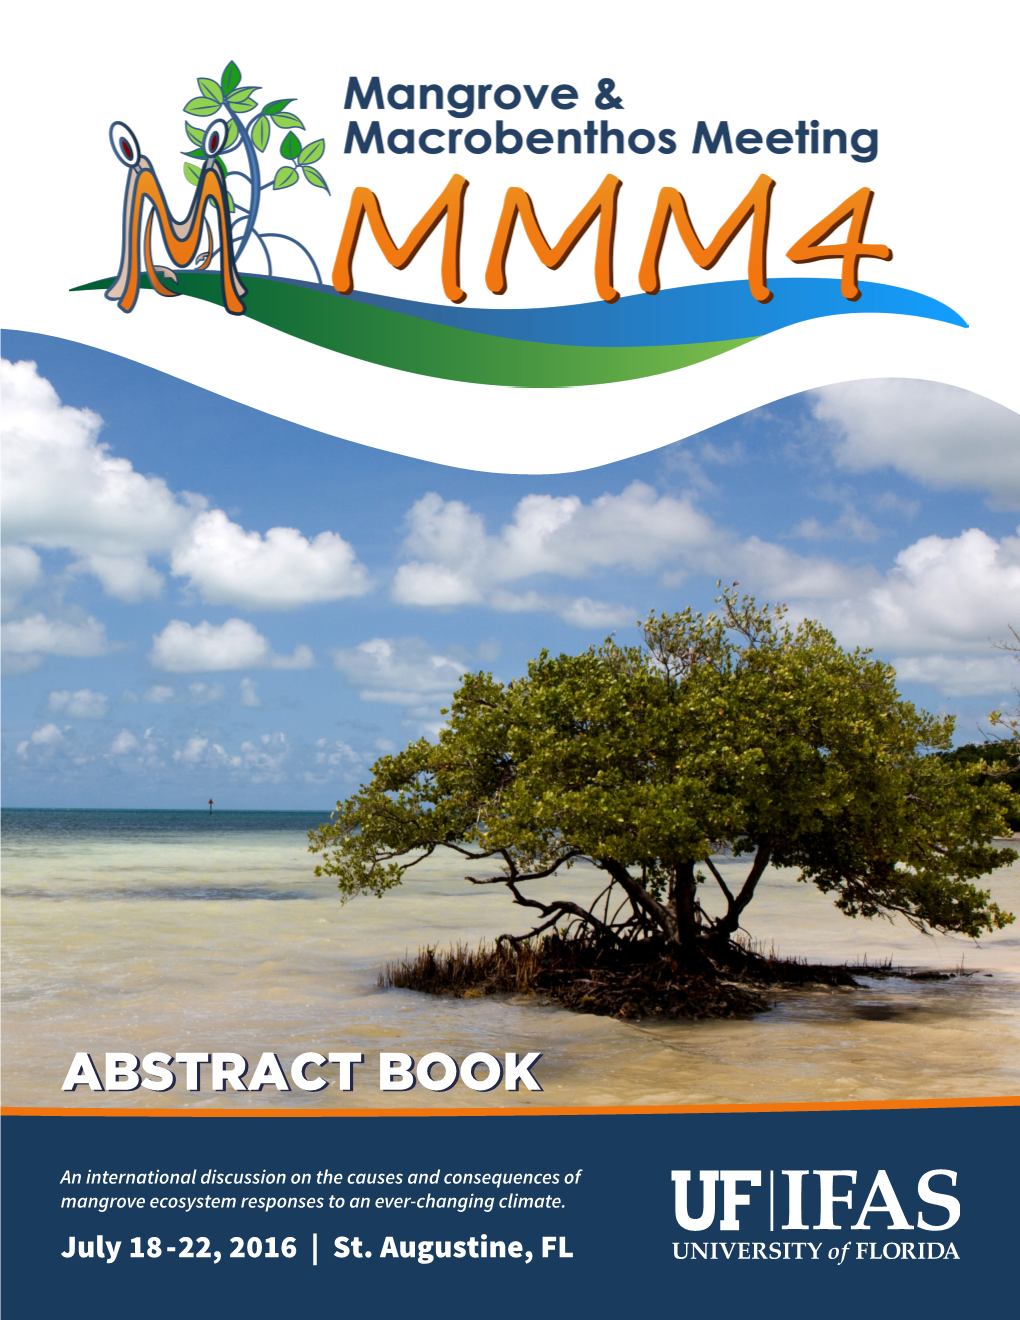 2016 MMM4 Online Abstract Book